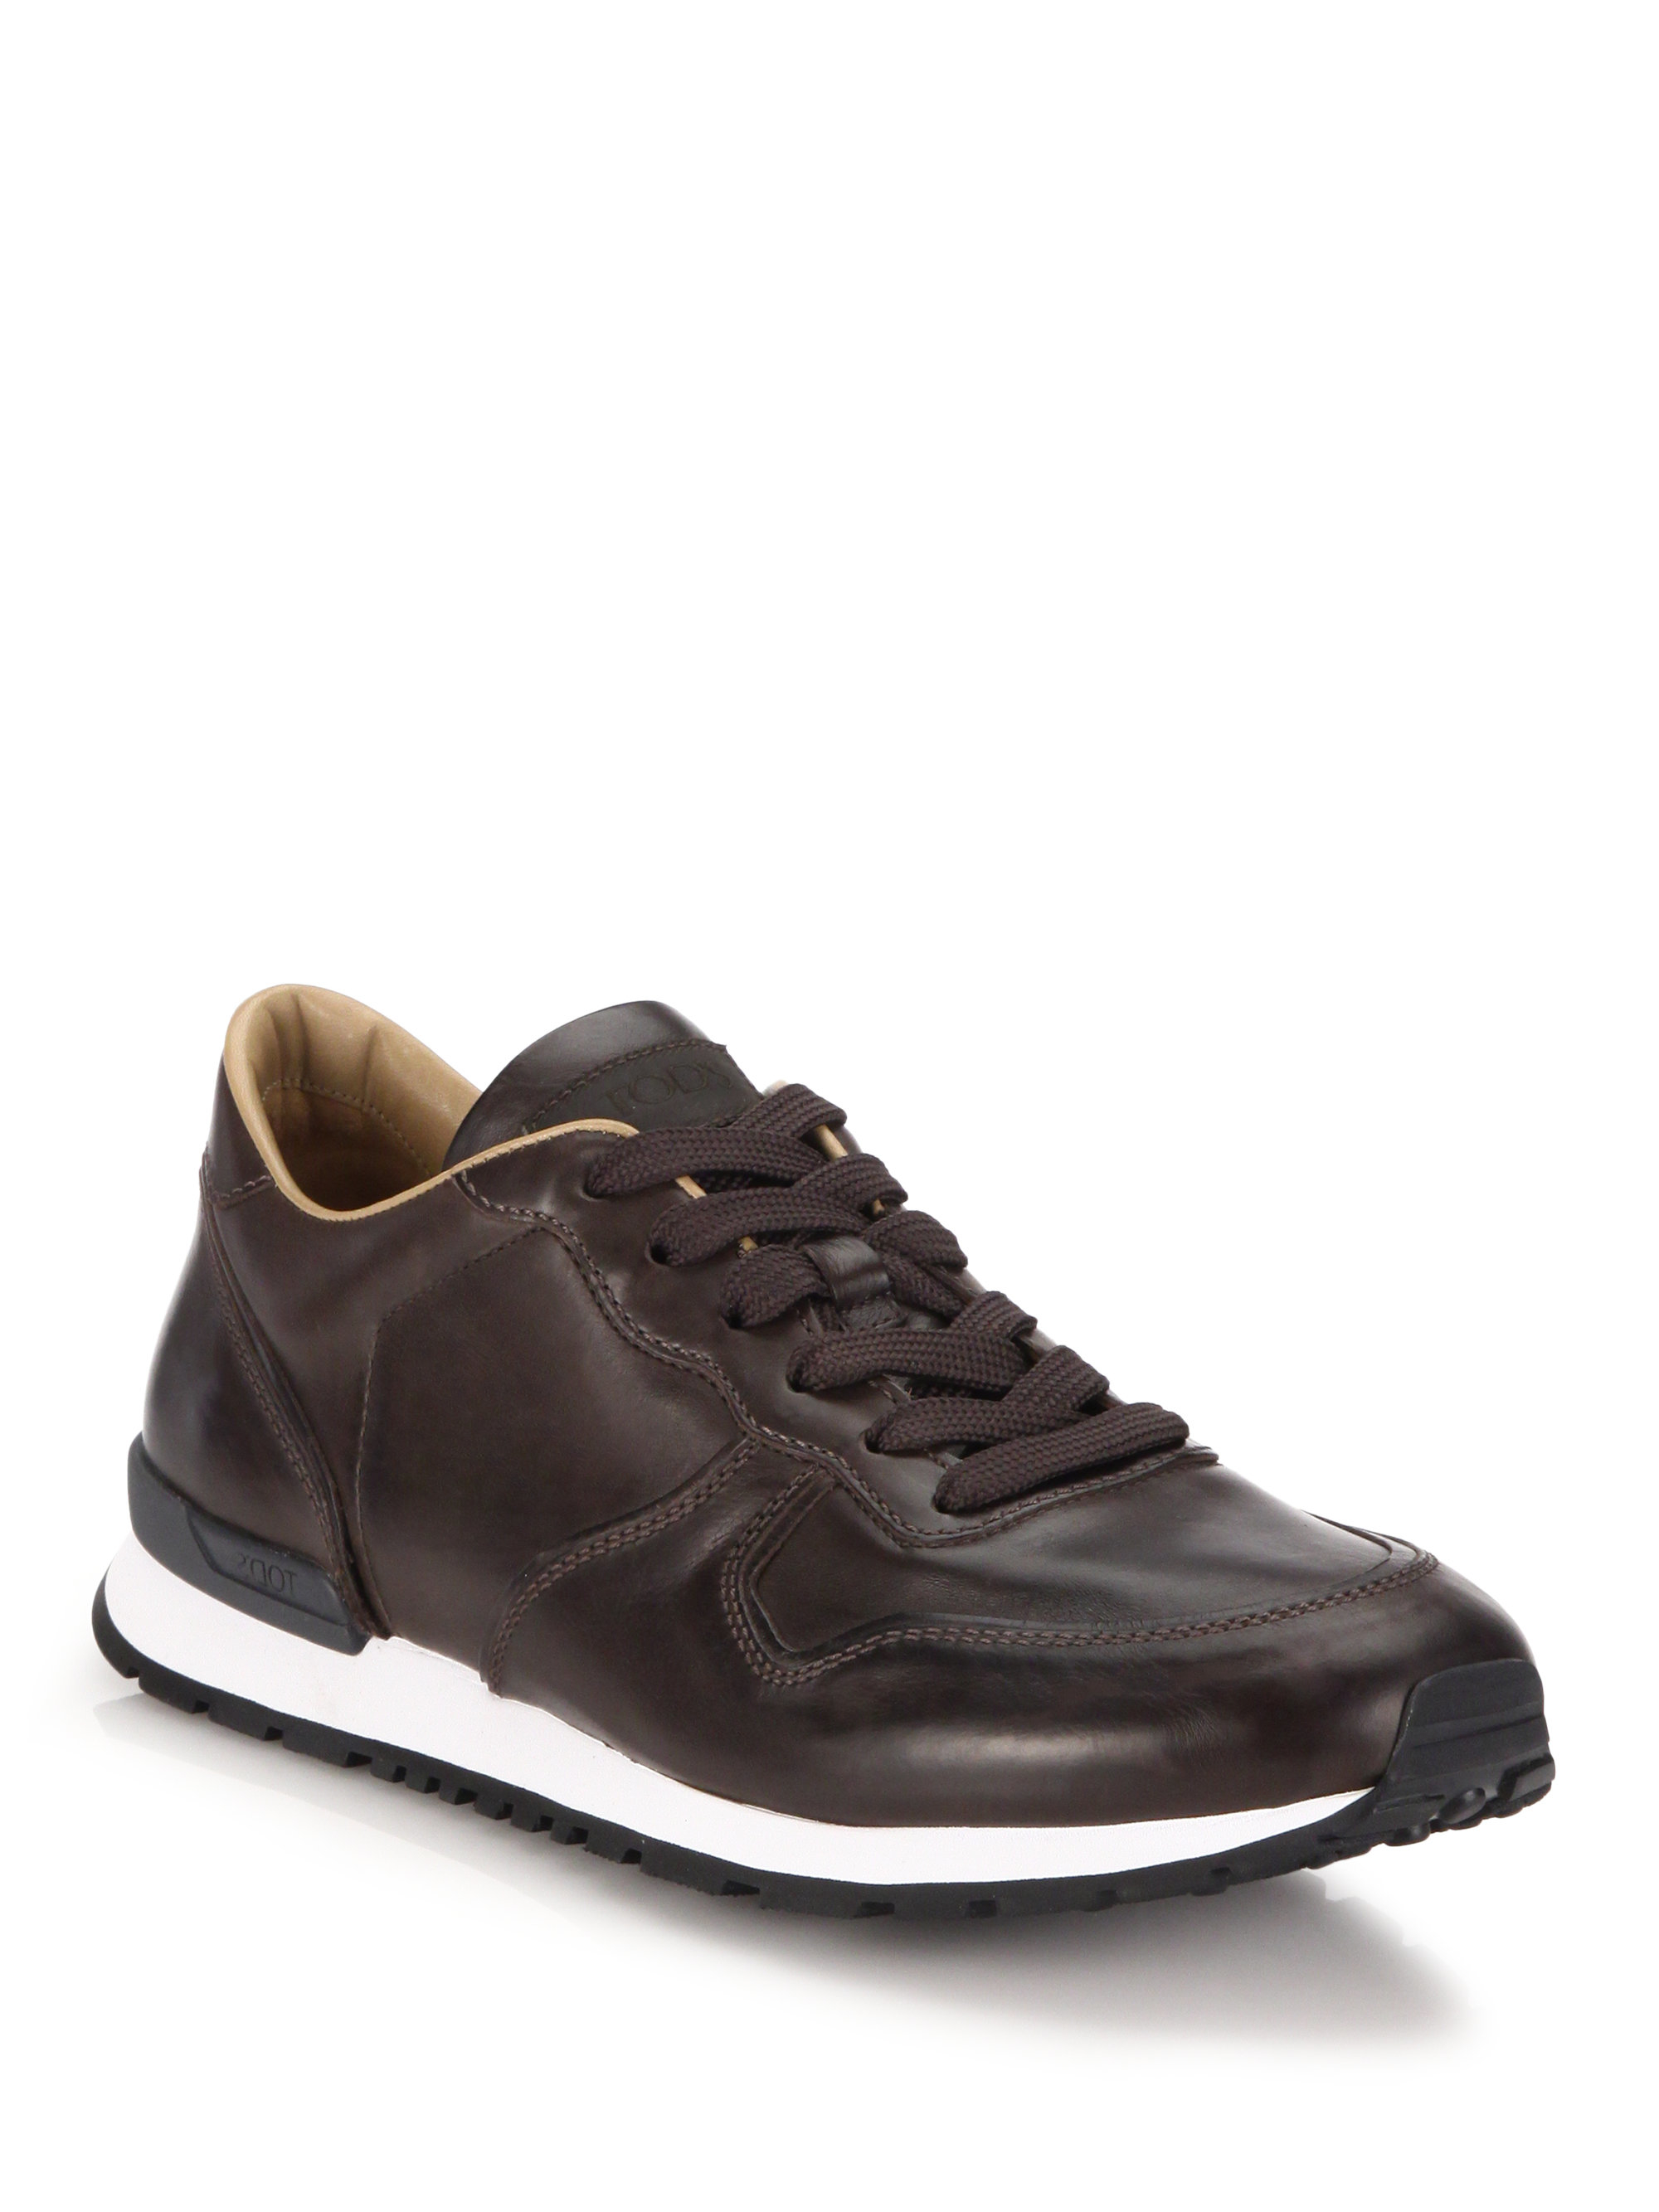 Lyst - Tod'S Leather Sneakers in Brown for Men